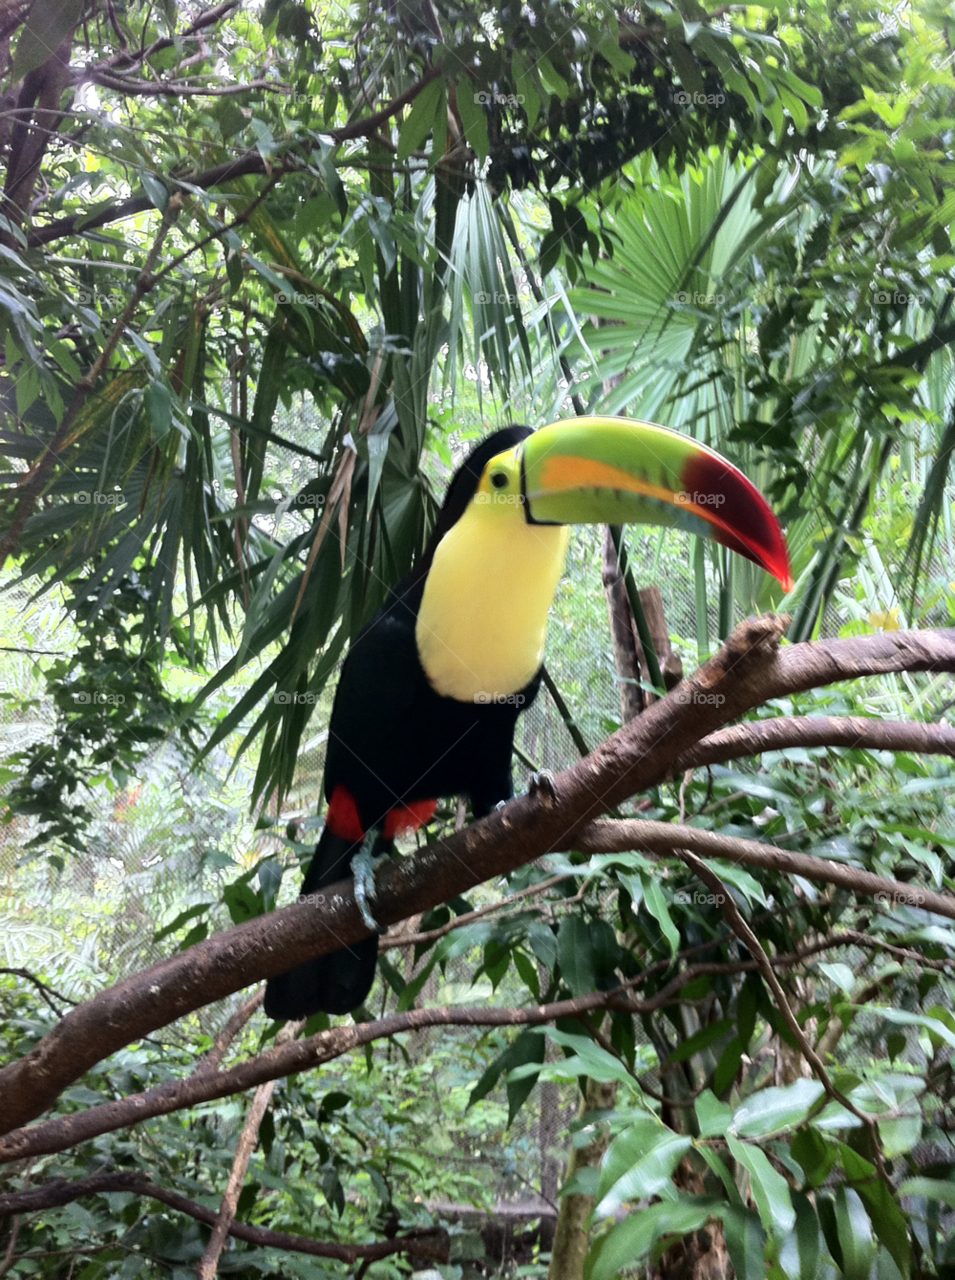 Mexican Toucan . While on holiday in Mexico I came across this little guy, he was fun to watch while he tried to eat a lime 